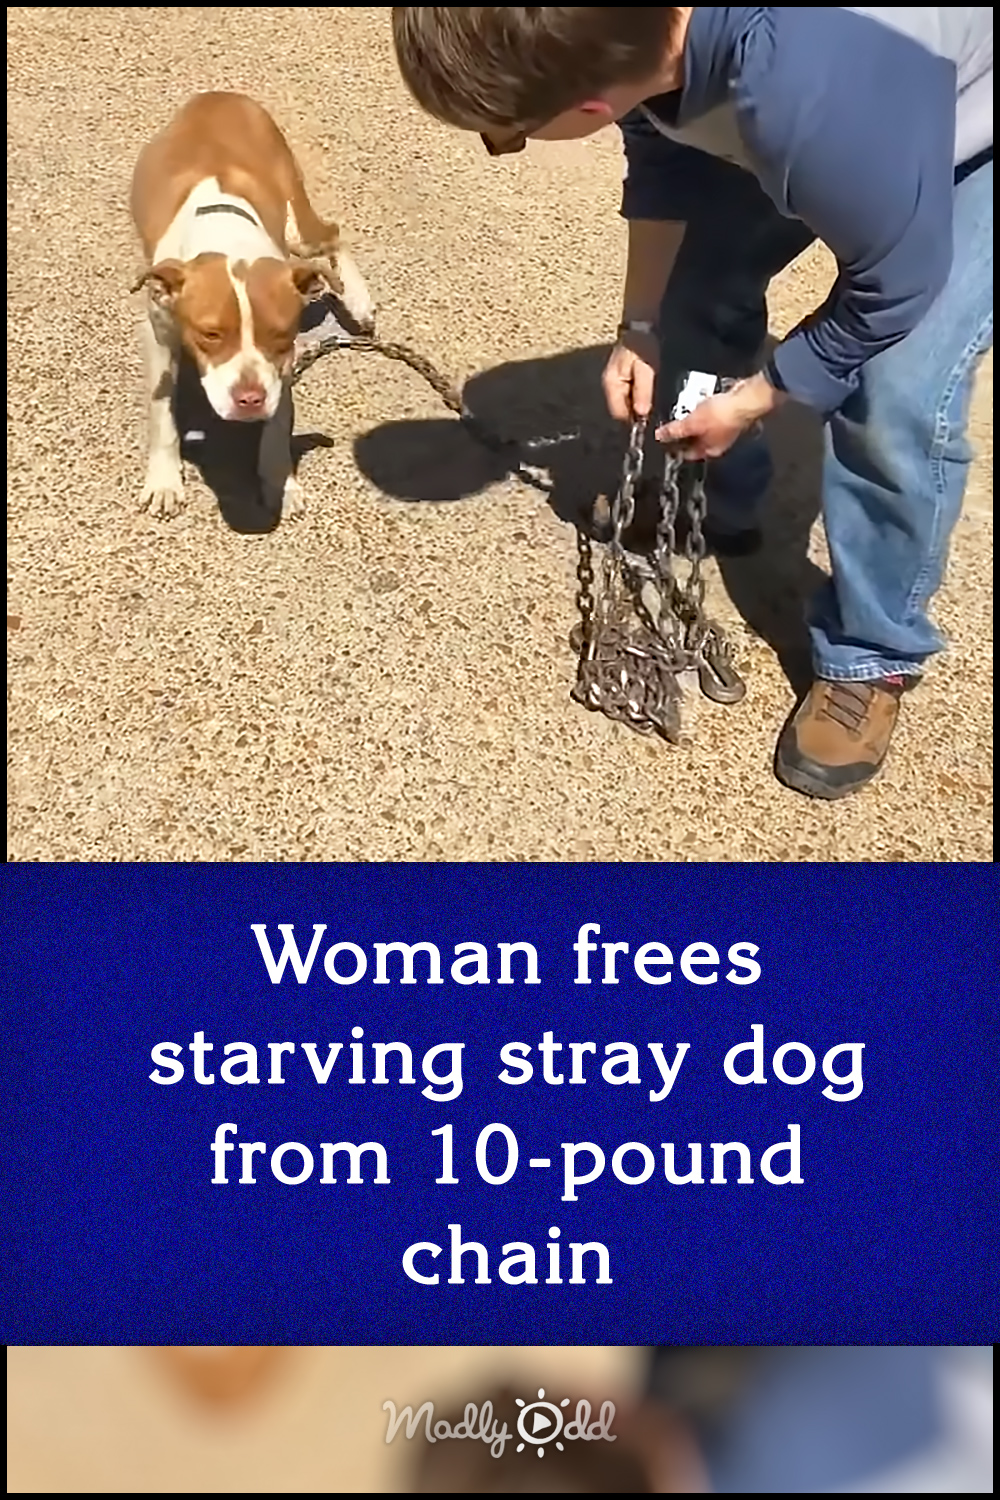 Woman frees starving stray dog from 10-pound chain